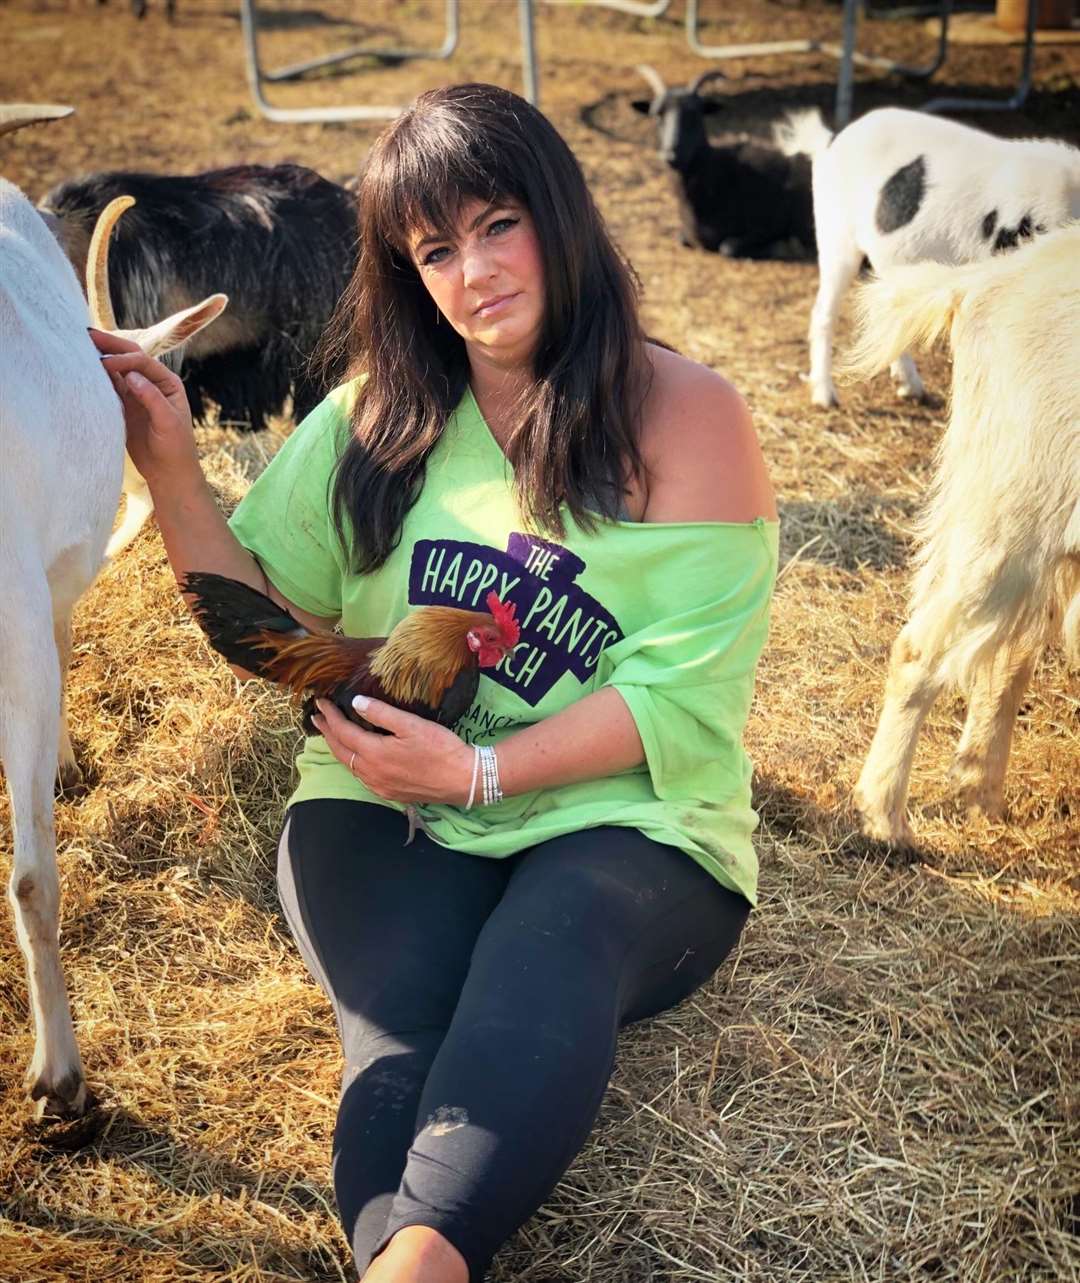 Amey James, founder of The Happy Pants Ranch at Bobbing with cockerel and goat